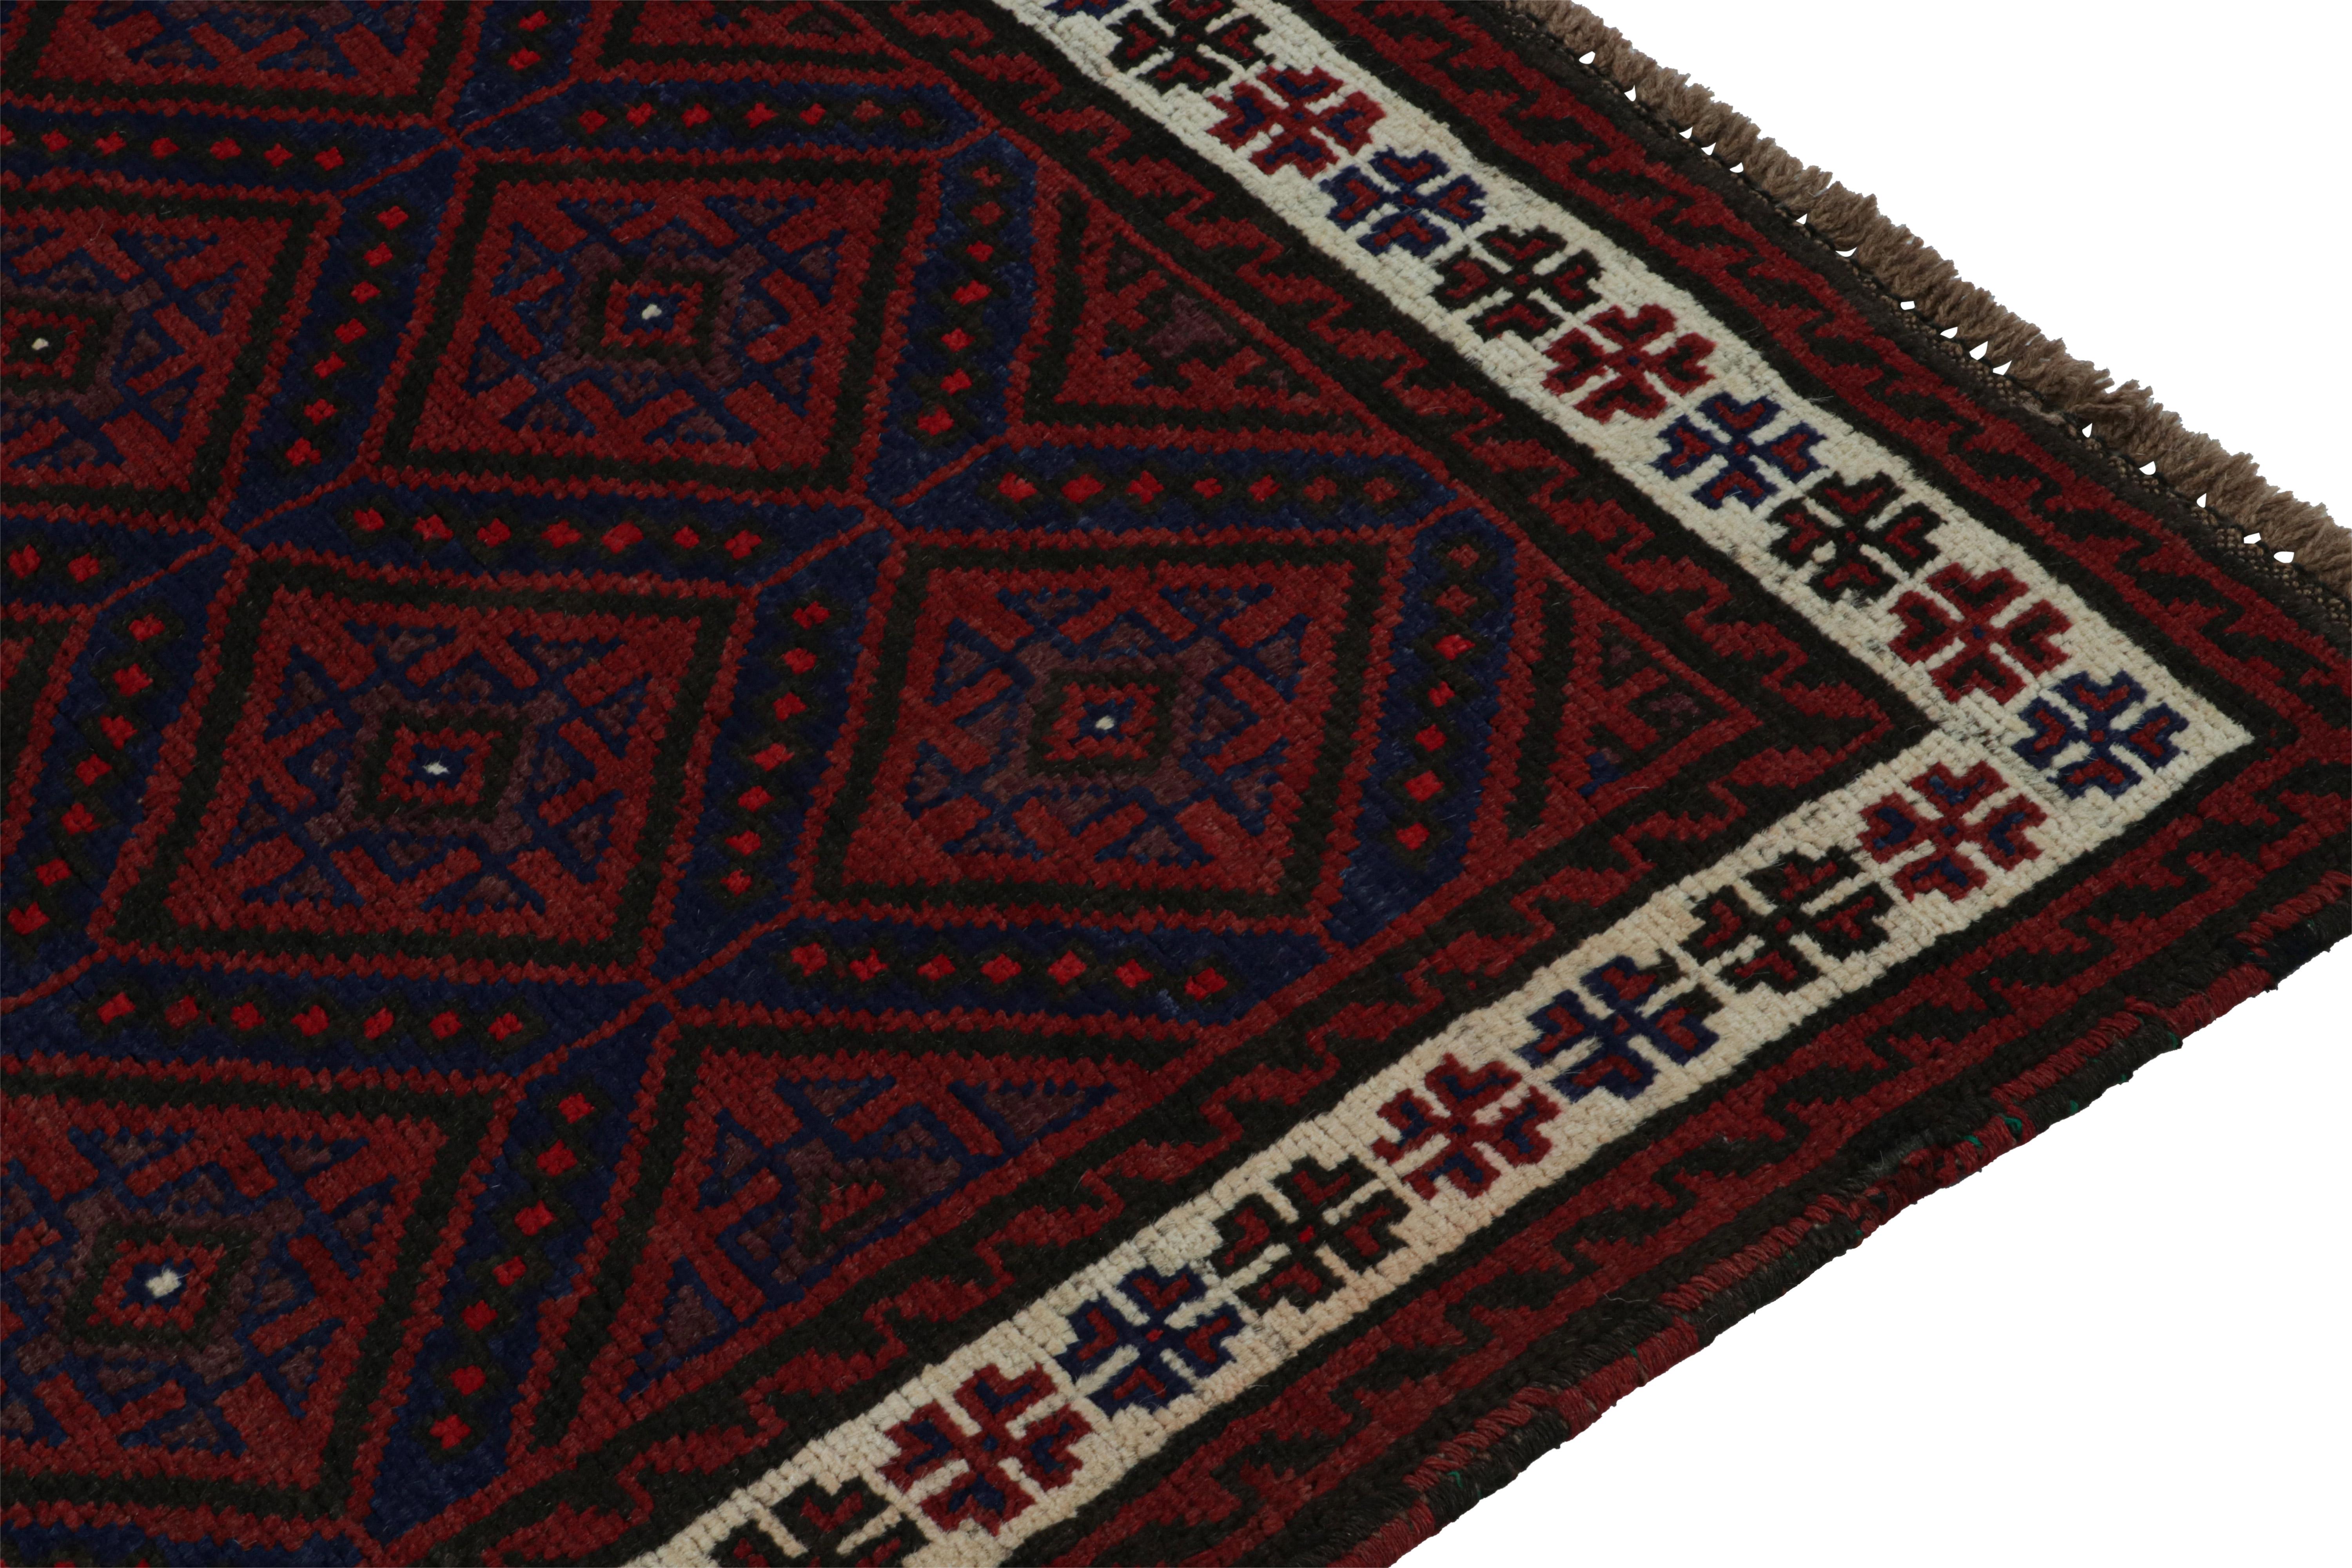 Vintage Baluch Tribal Rug in Red & Navy Blue Patterns by Rug & Kilim In Good Condition For Sale In Long Island City, NY